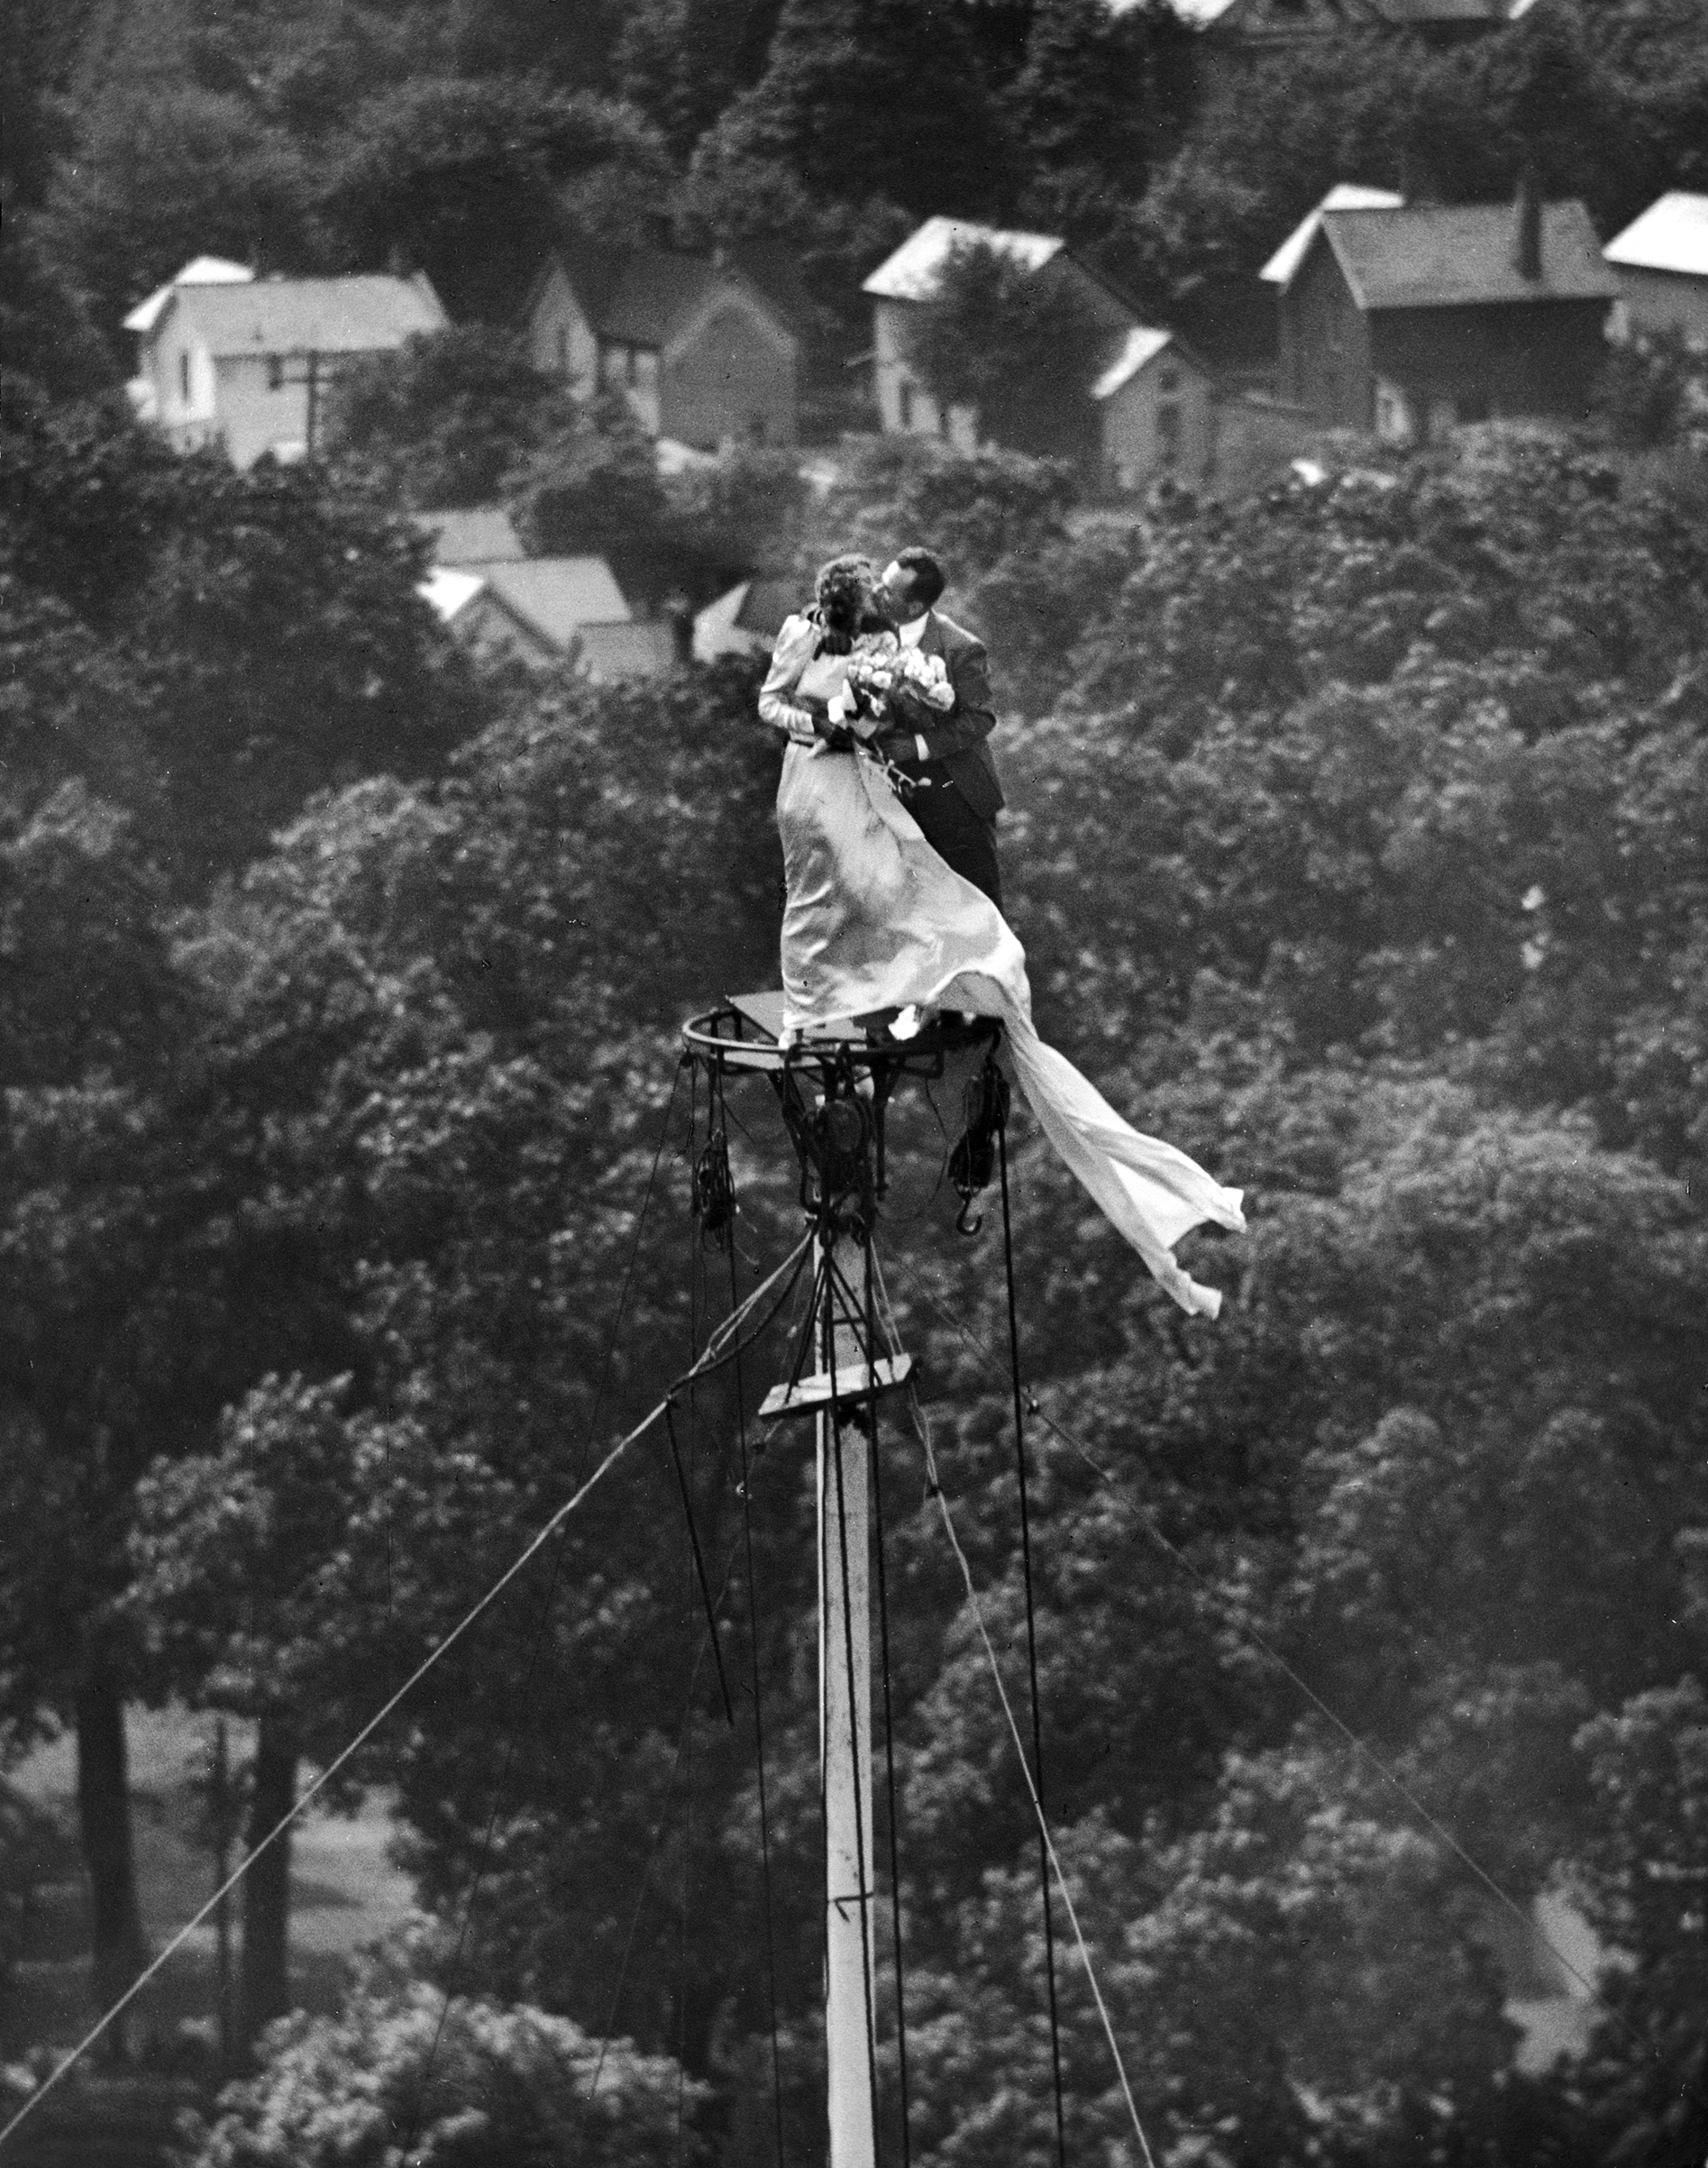 Newly wed couple Marshall Jacobs and wife Yolanda kiss after being married atop a flagpole. 1946.